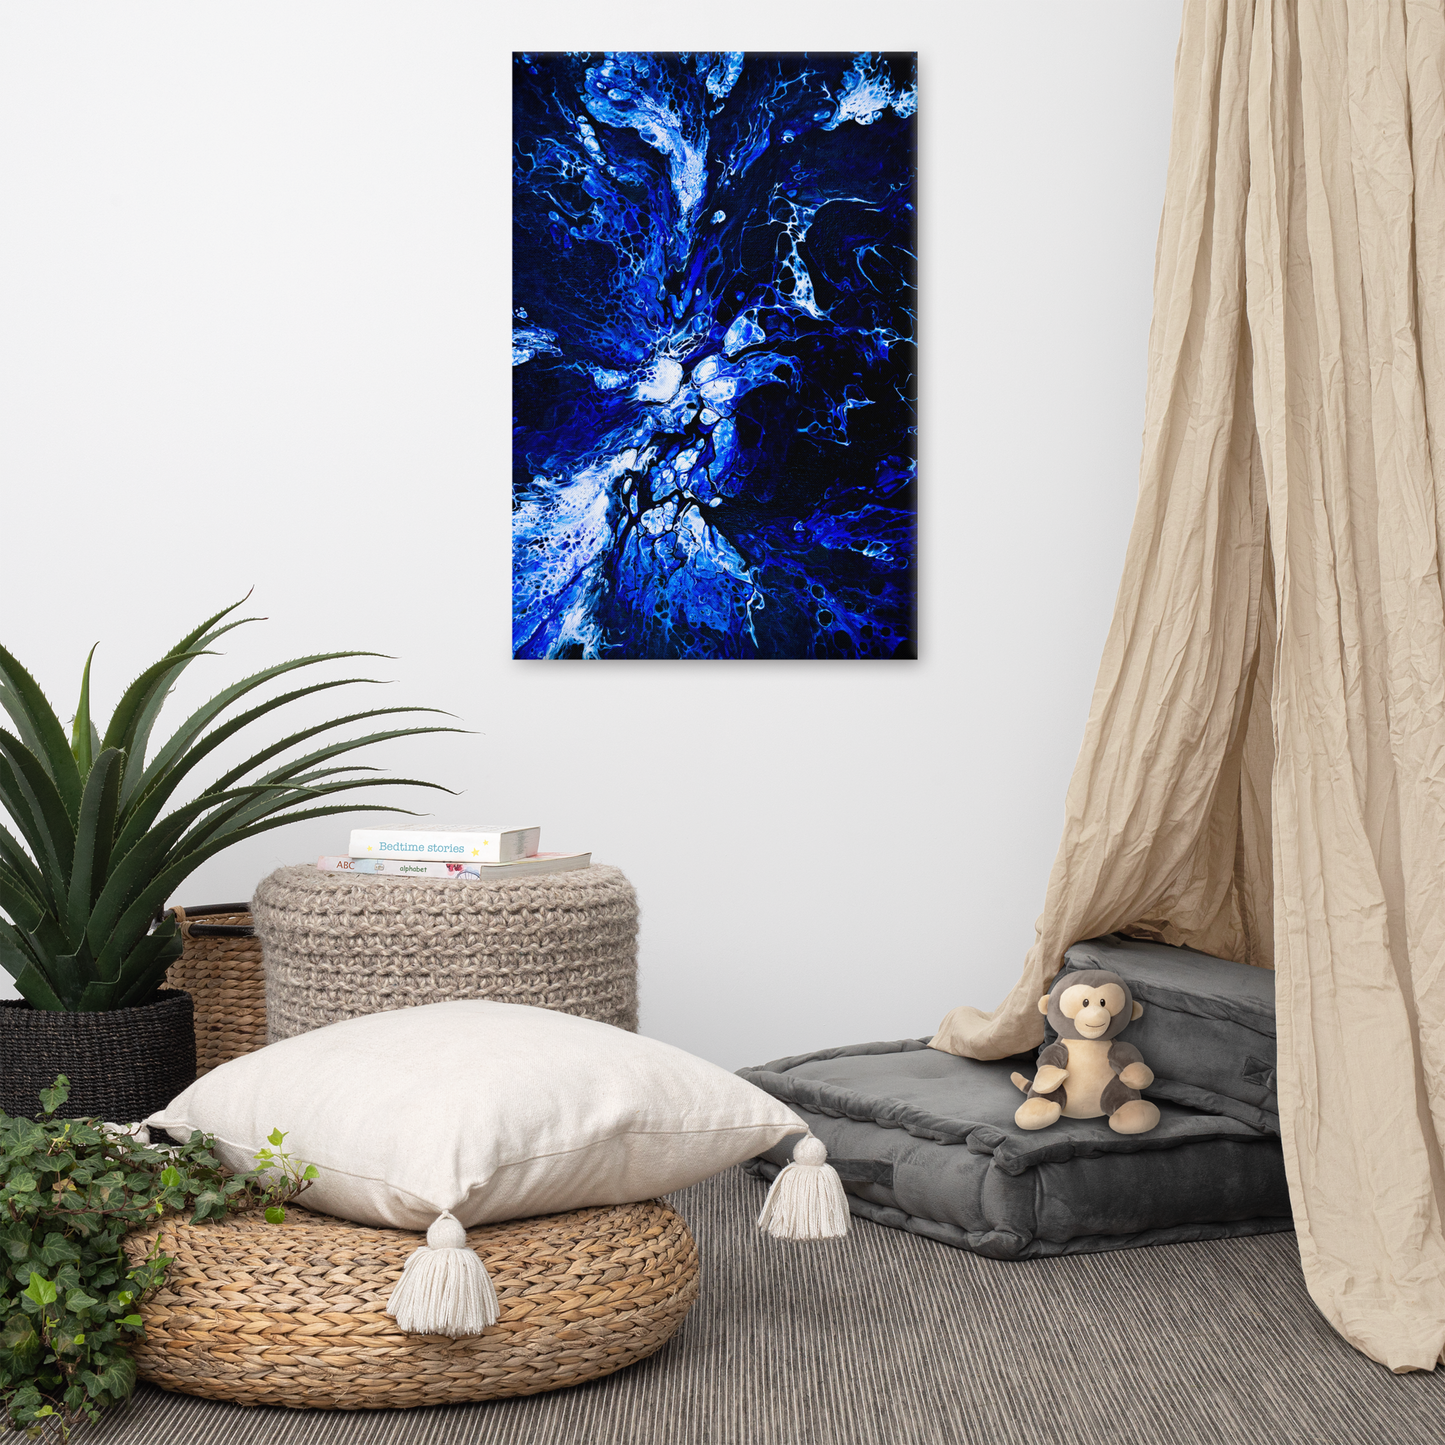 NightOwl Studio Abstract Wall Art, Blue Burst, Boho Living Room, Bedroom, Office, and Home Decor, Premium Canvas with Wooden Frame, Acrylic Painting Reproduction, 24” x 36”